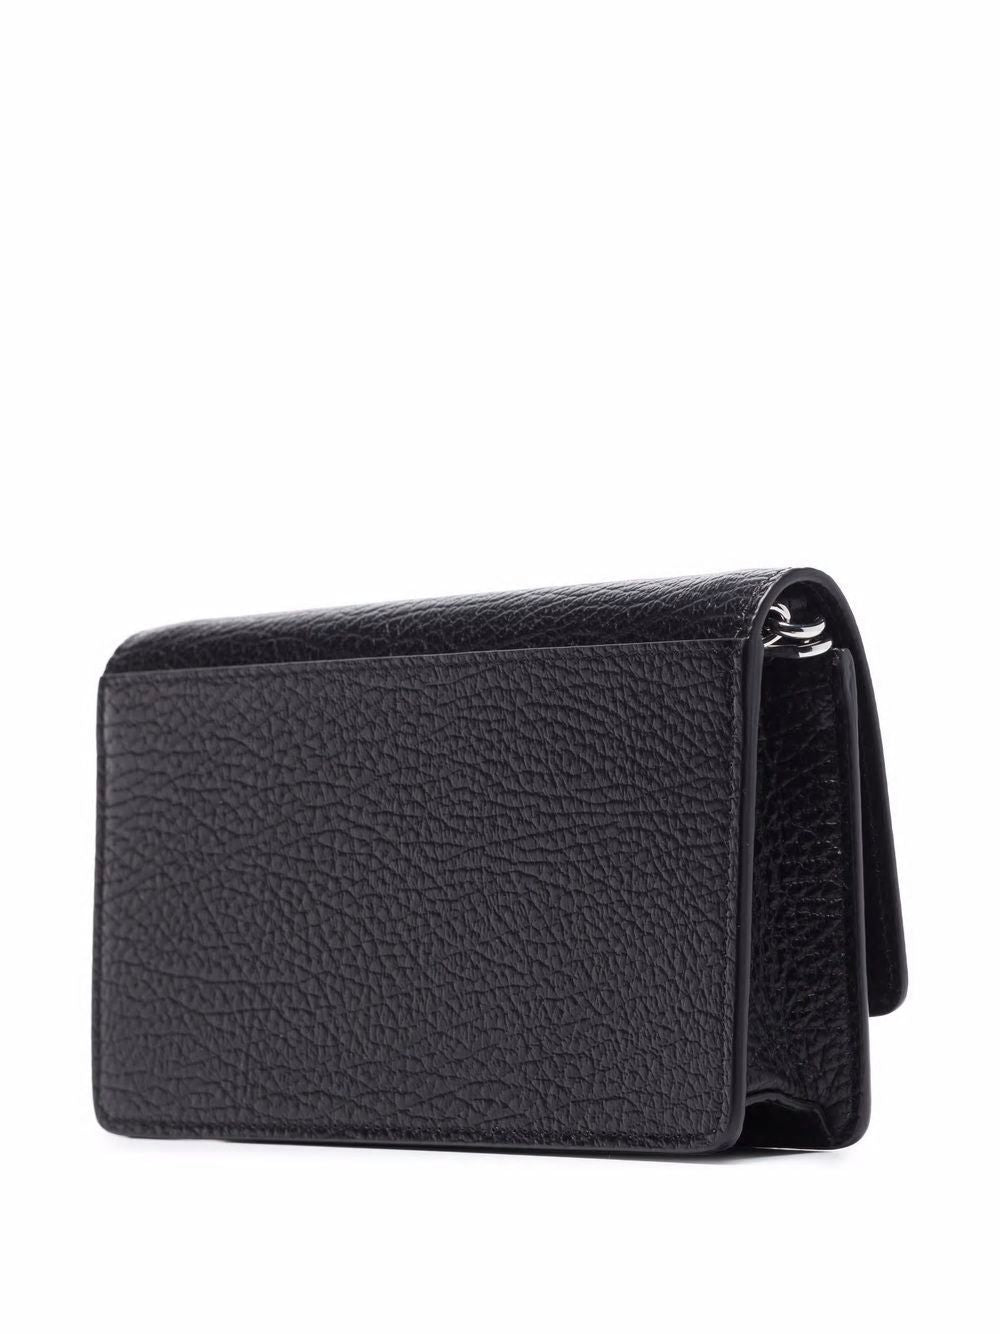 Black Leather Chain Wallet for Women